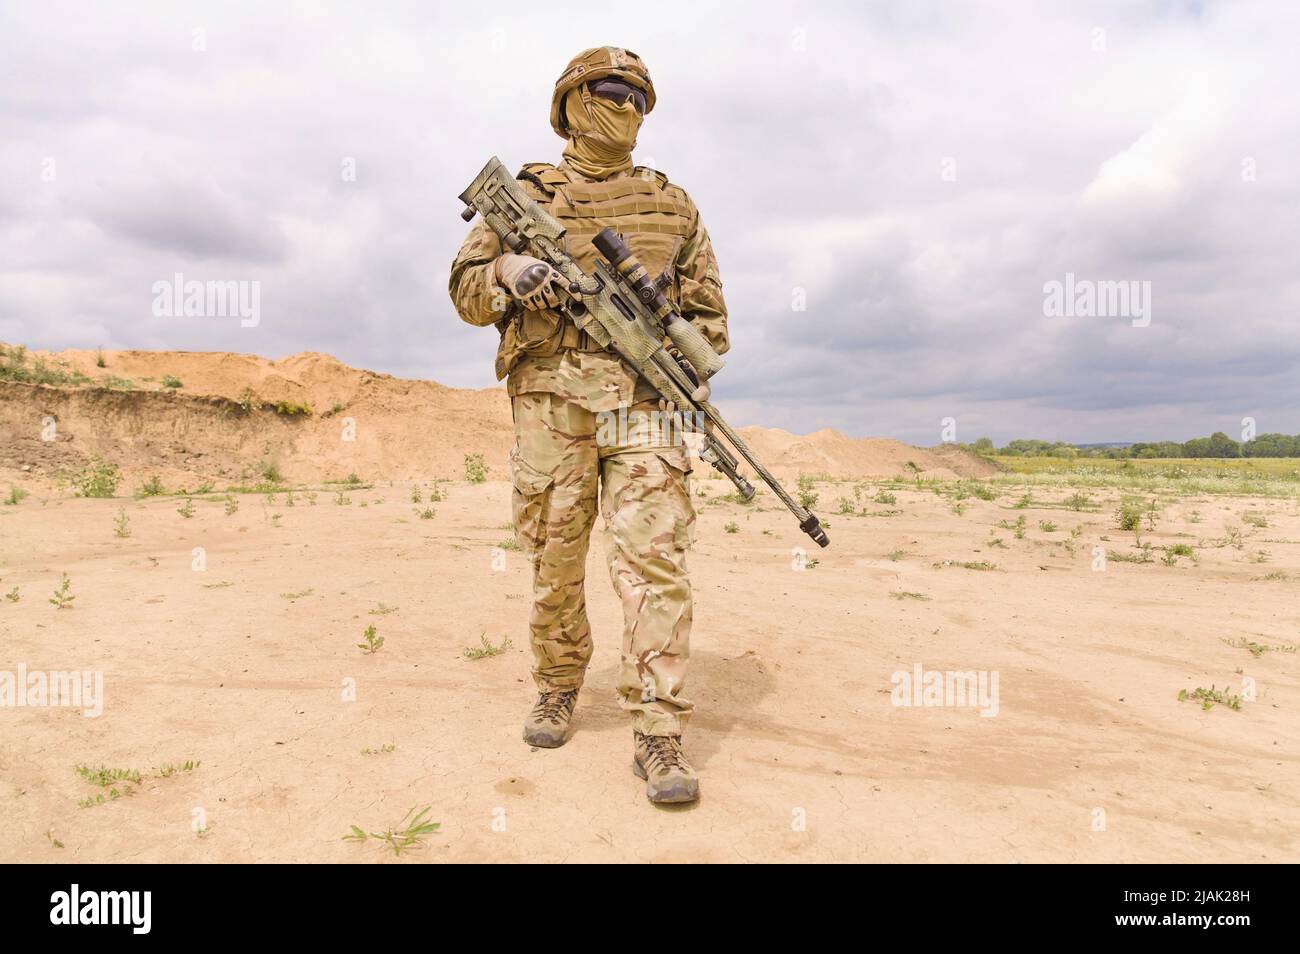 Fully equipped and armed soldier with rifle in the desert. Stock Photo